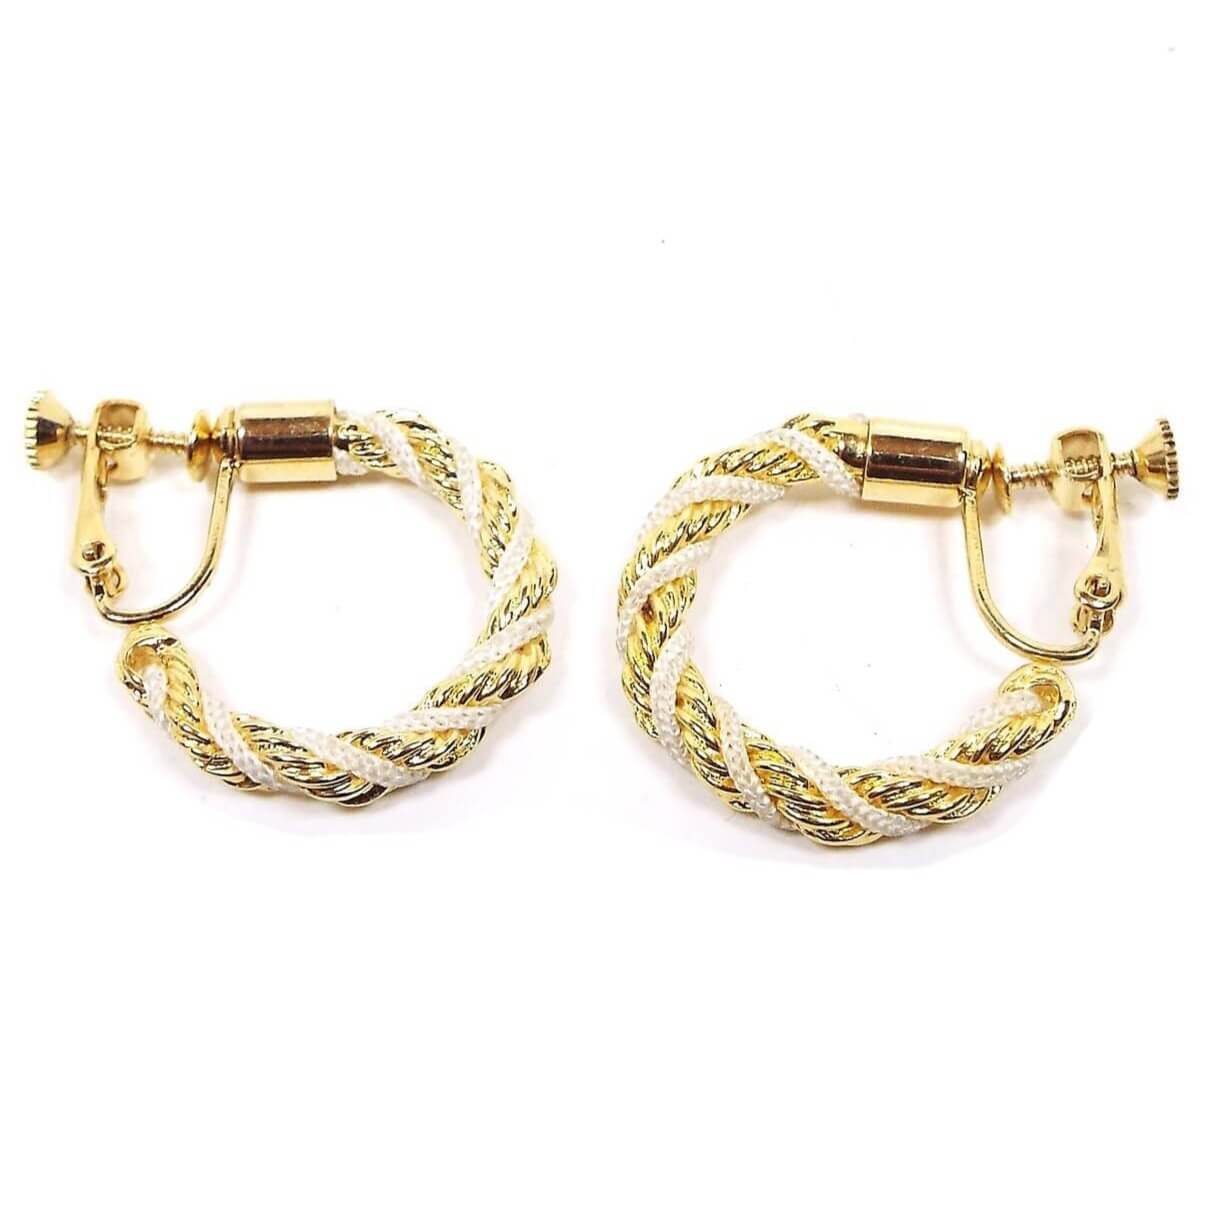 Side view of the Napier retro vintage hoop earrings. The metal is gold tone in color. The hoops are twisted with metal chain and white nylon cord. The clip on backs have screws so you can adjust them for comfort.